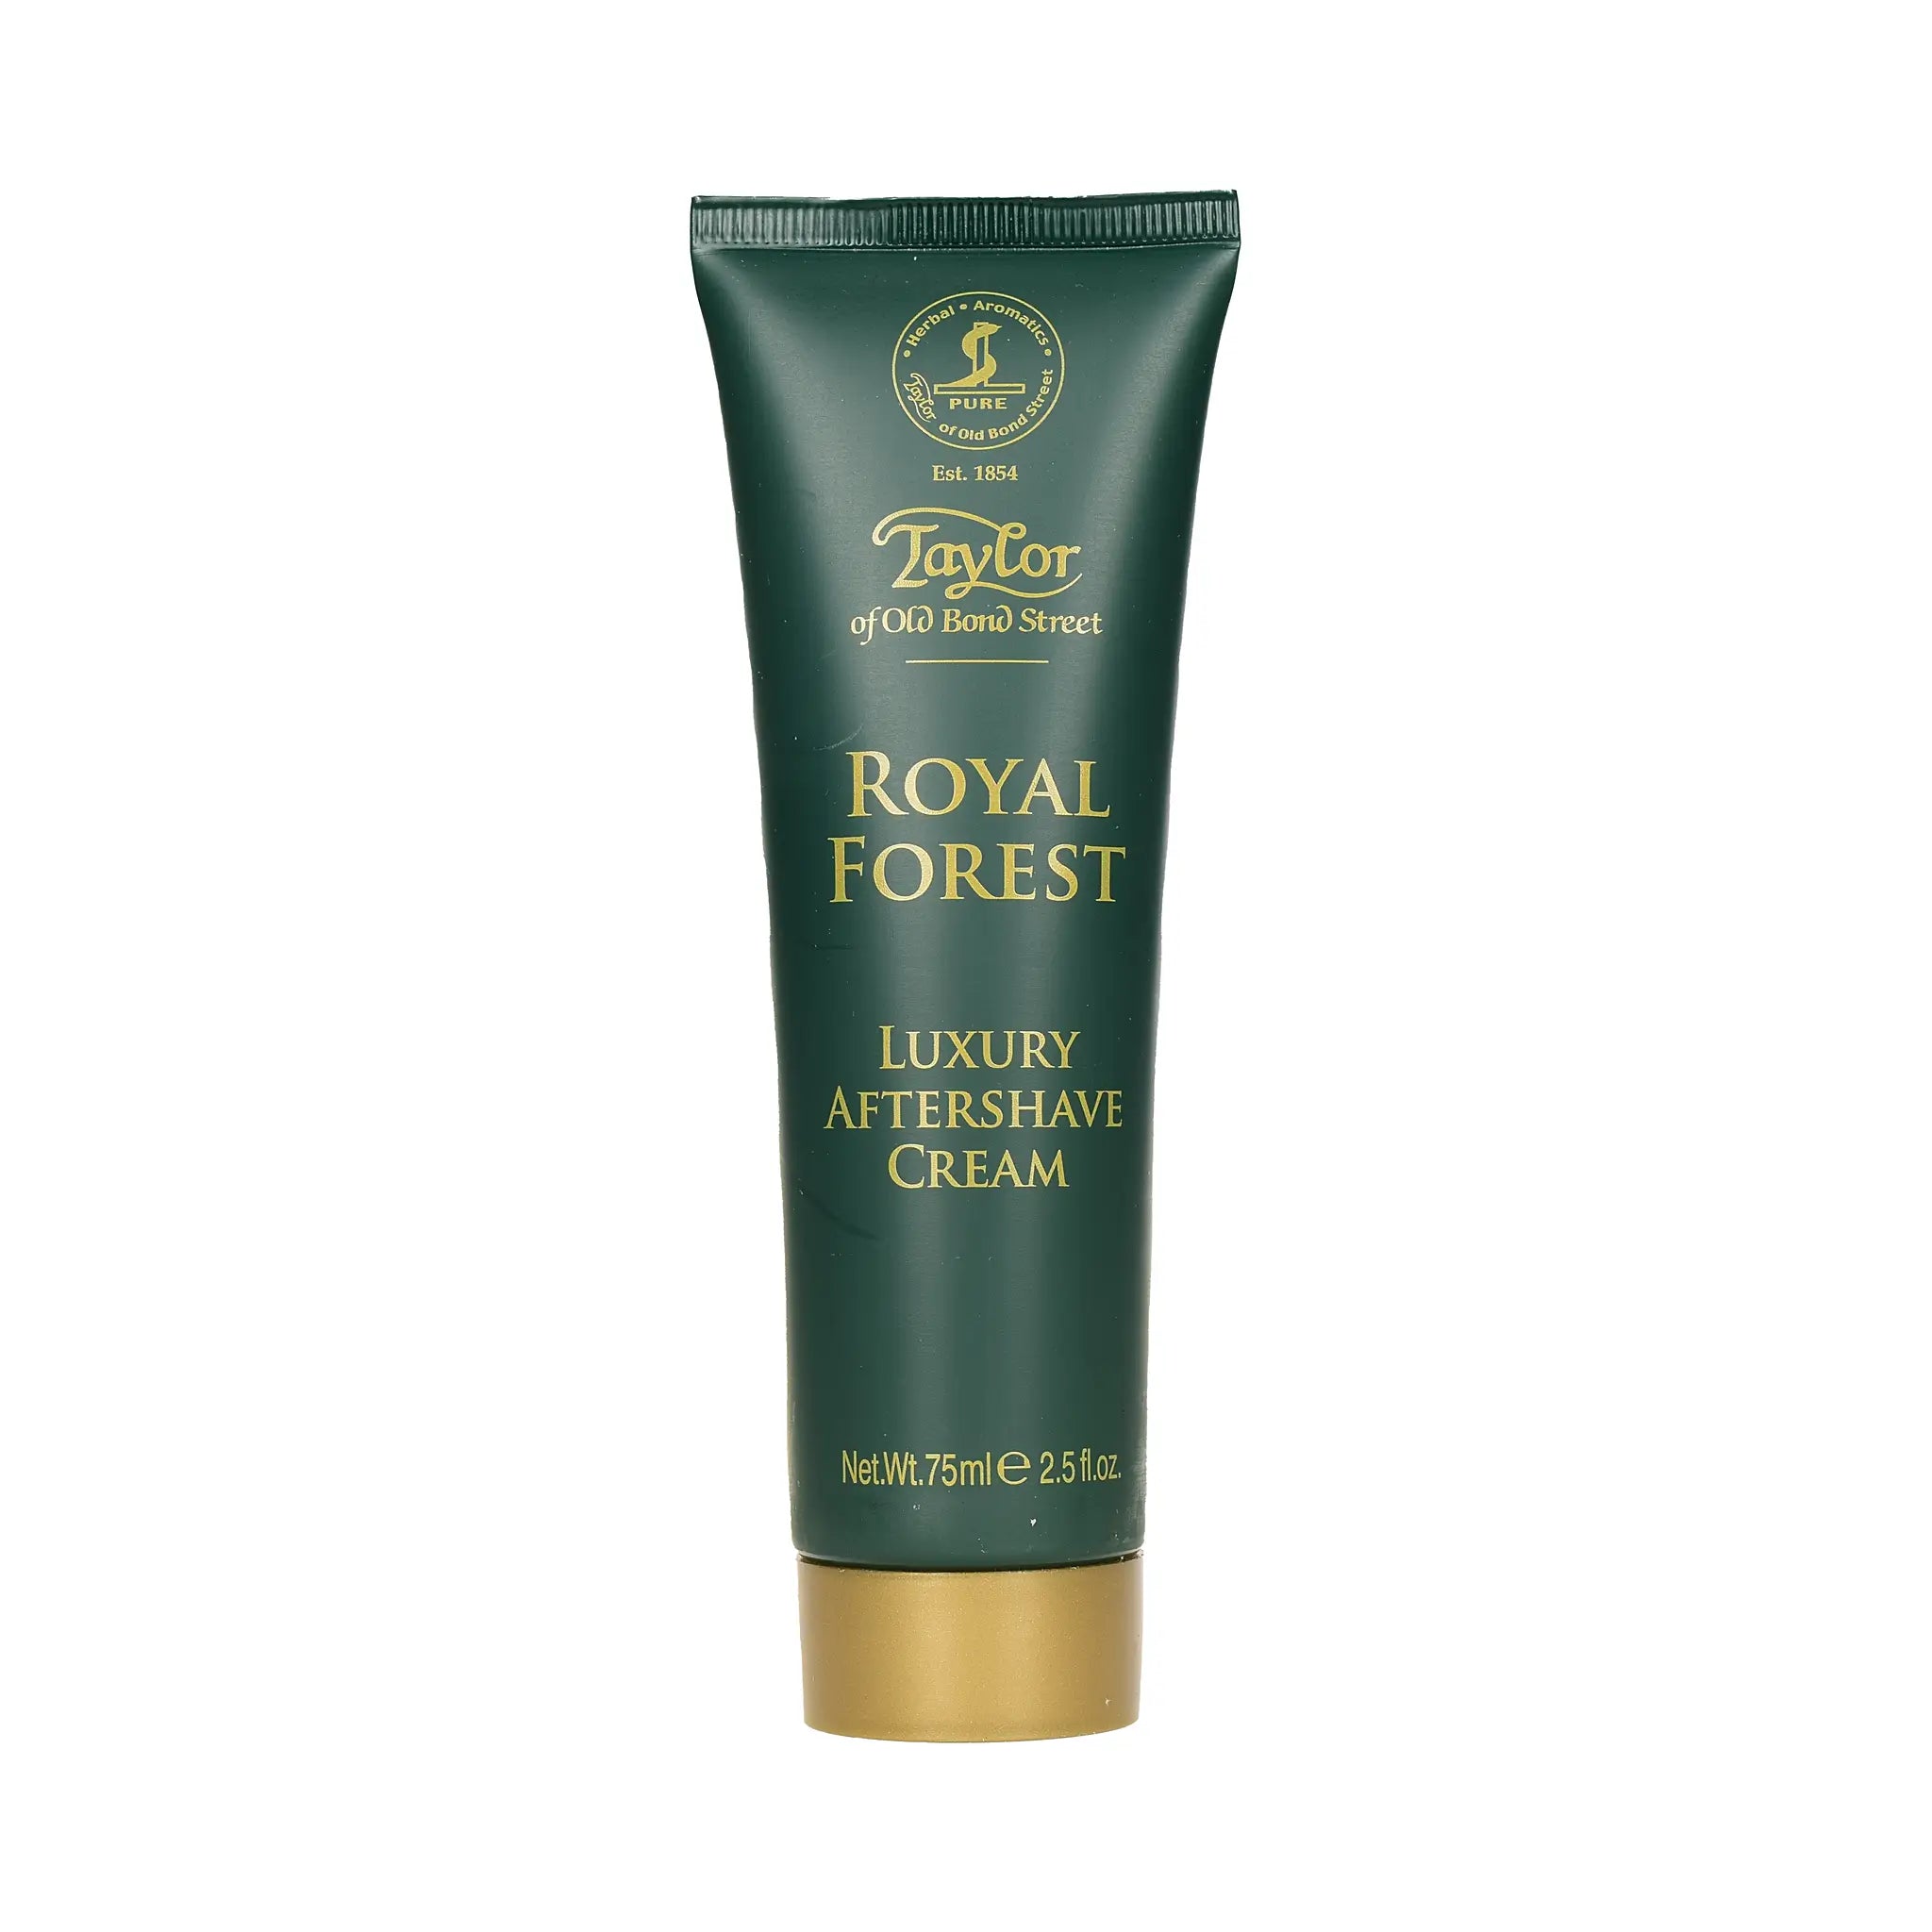 Cream, Tonsus STREET Royal Aftershave BOND TAYLOR OF – OLD Forest ml 75